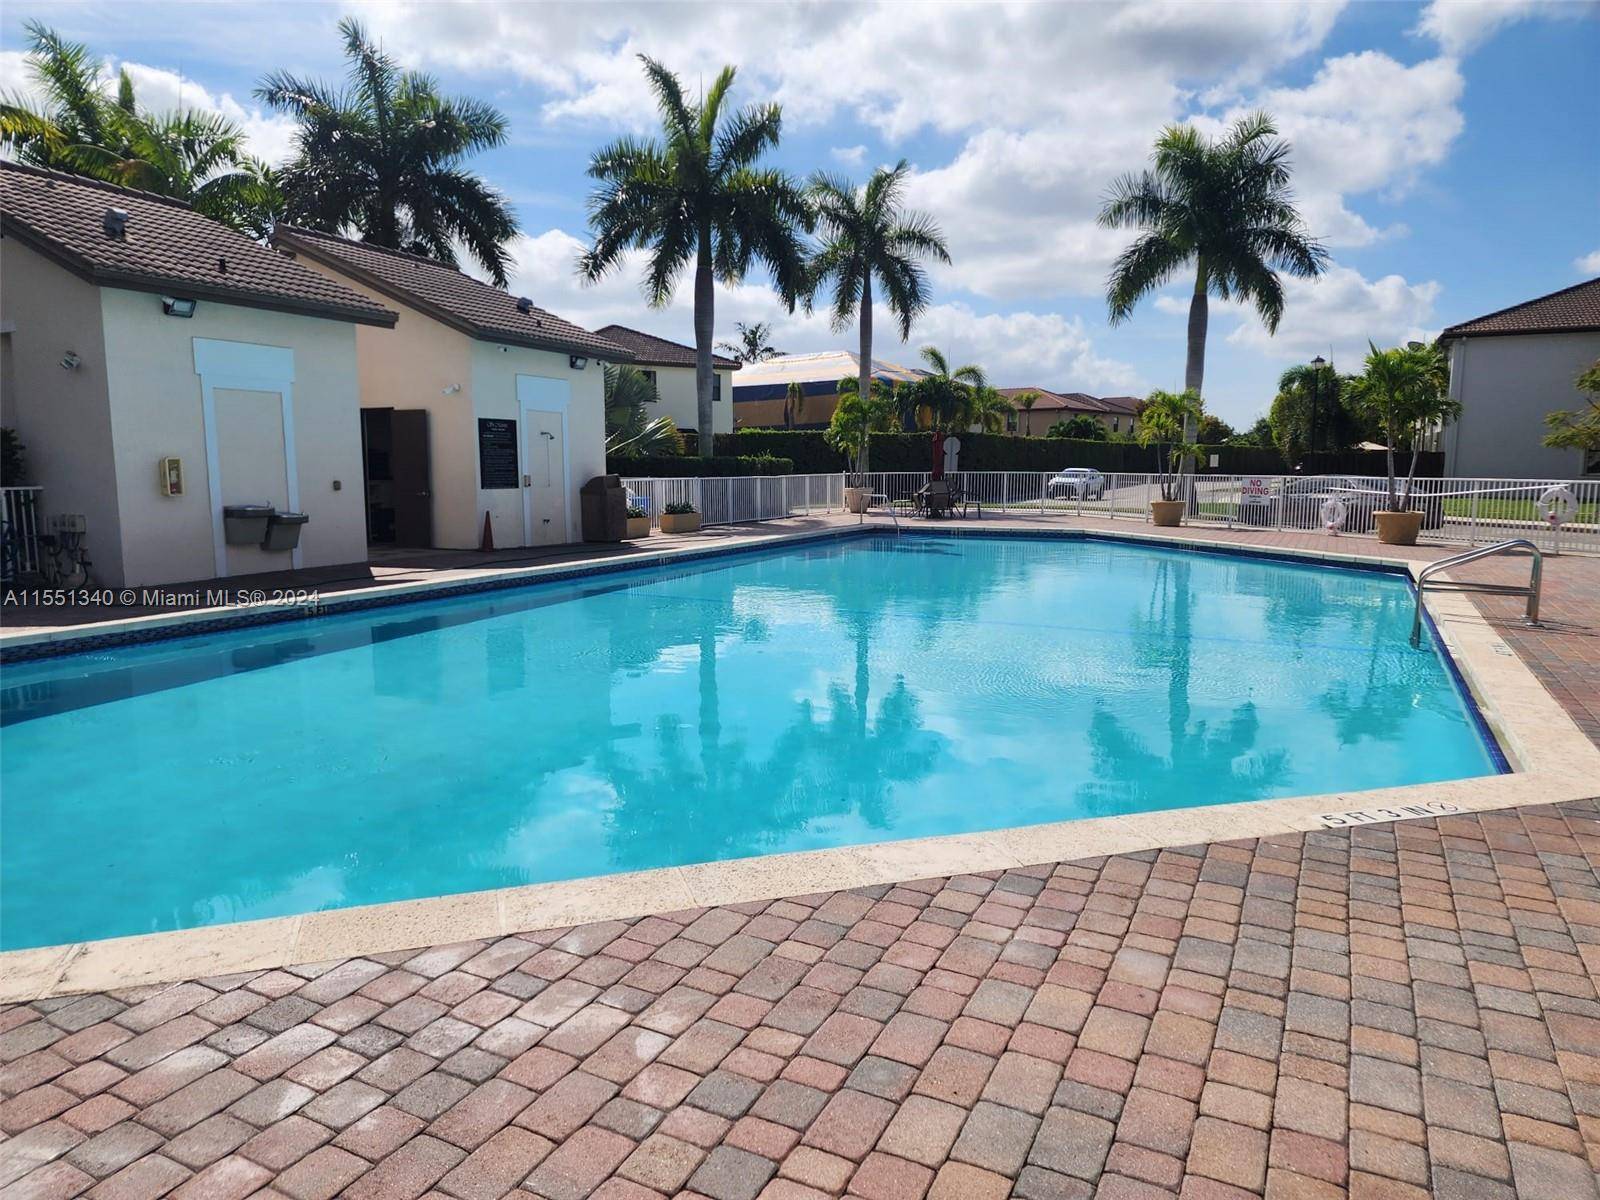 Beautiful apartment in front of the pool, it has two stories w 1500sqft, 3 bed, 2 1 2 bath, stainless steel appliances, granite countertop.